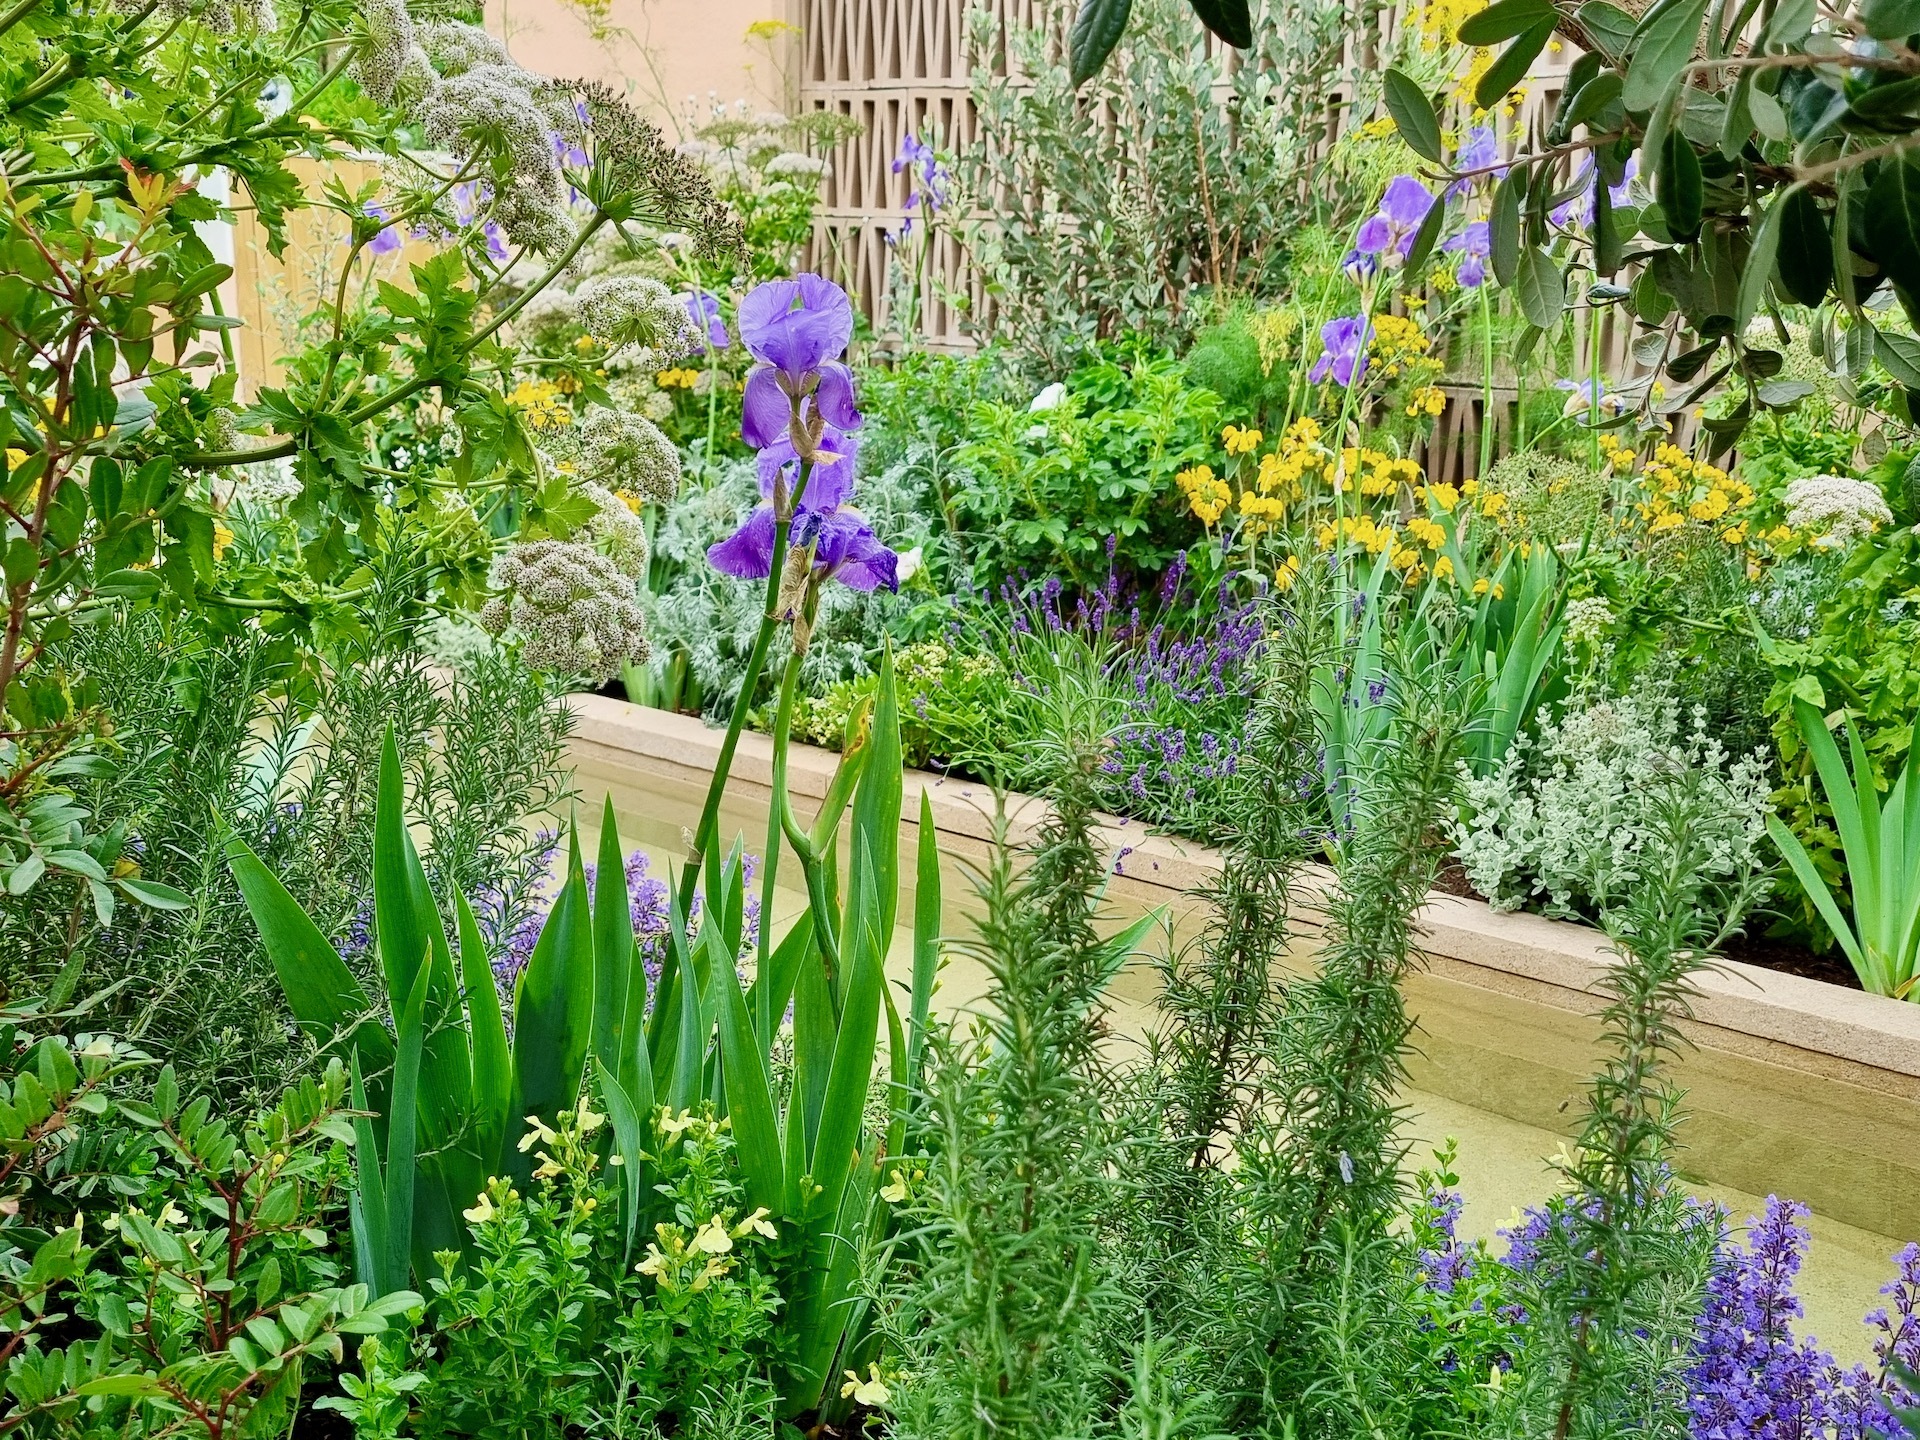 Garden raised bed with purple and yellow flowers